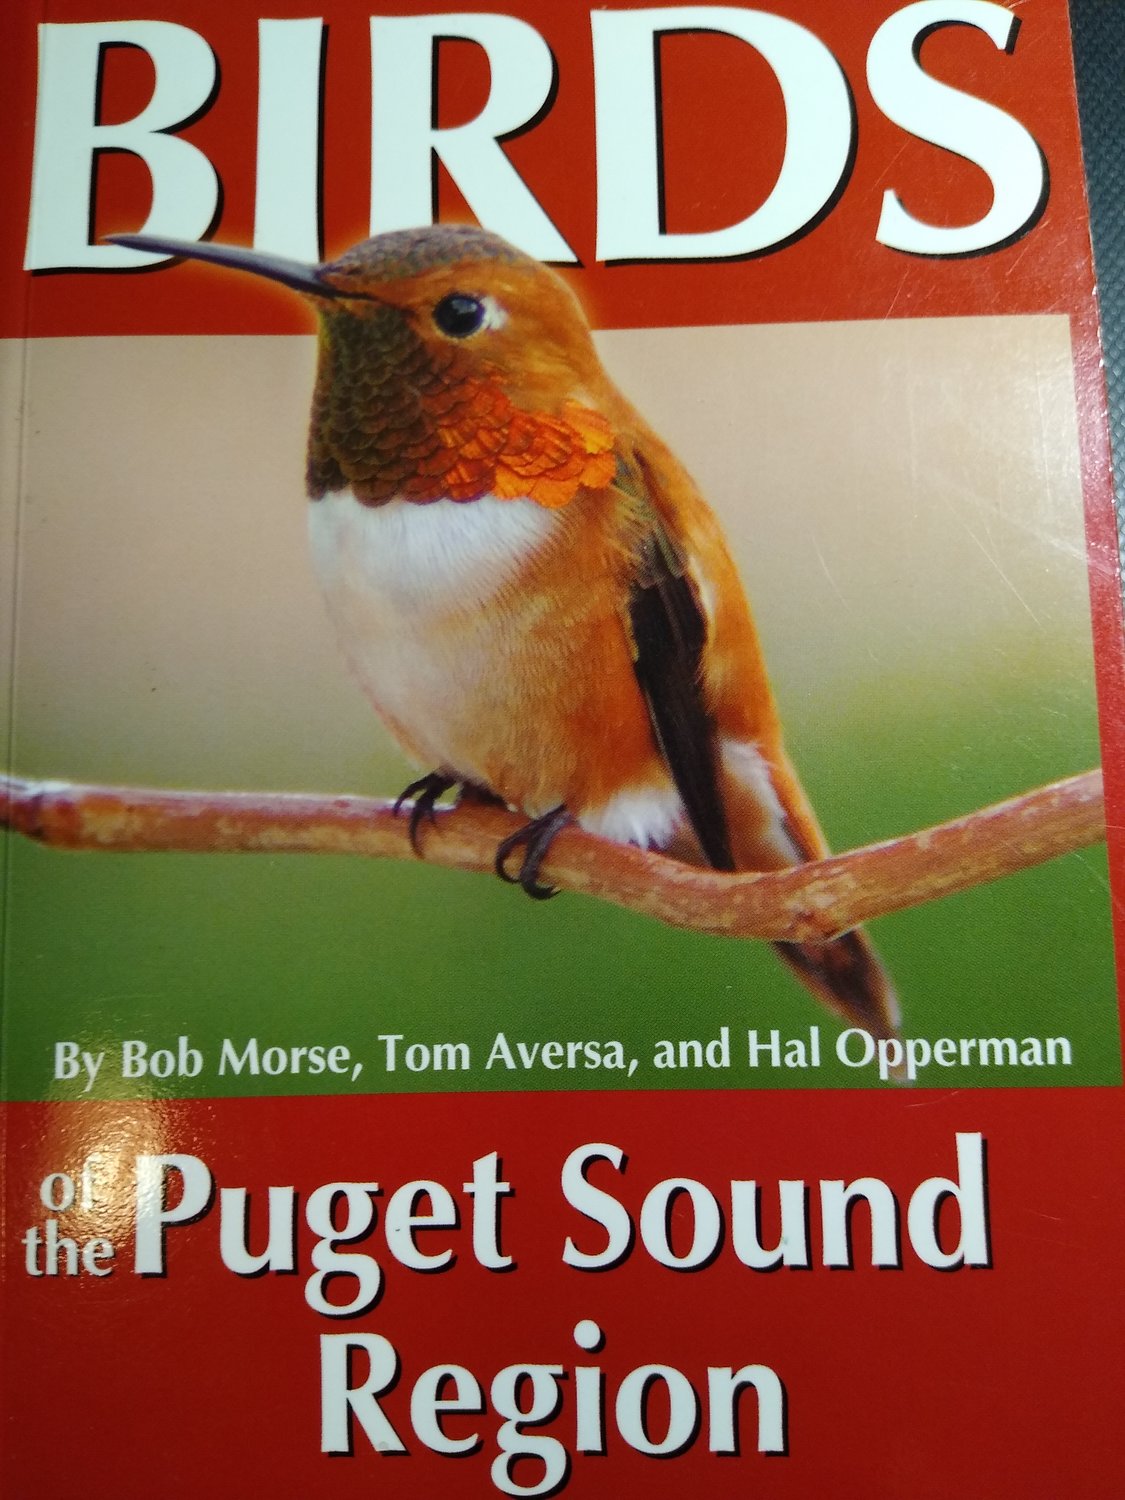 This image is of the cover of a years-old edition of "Birds of the Puget Sound Region."